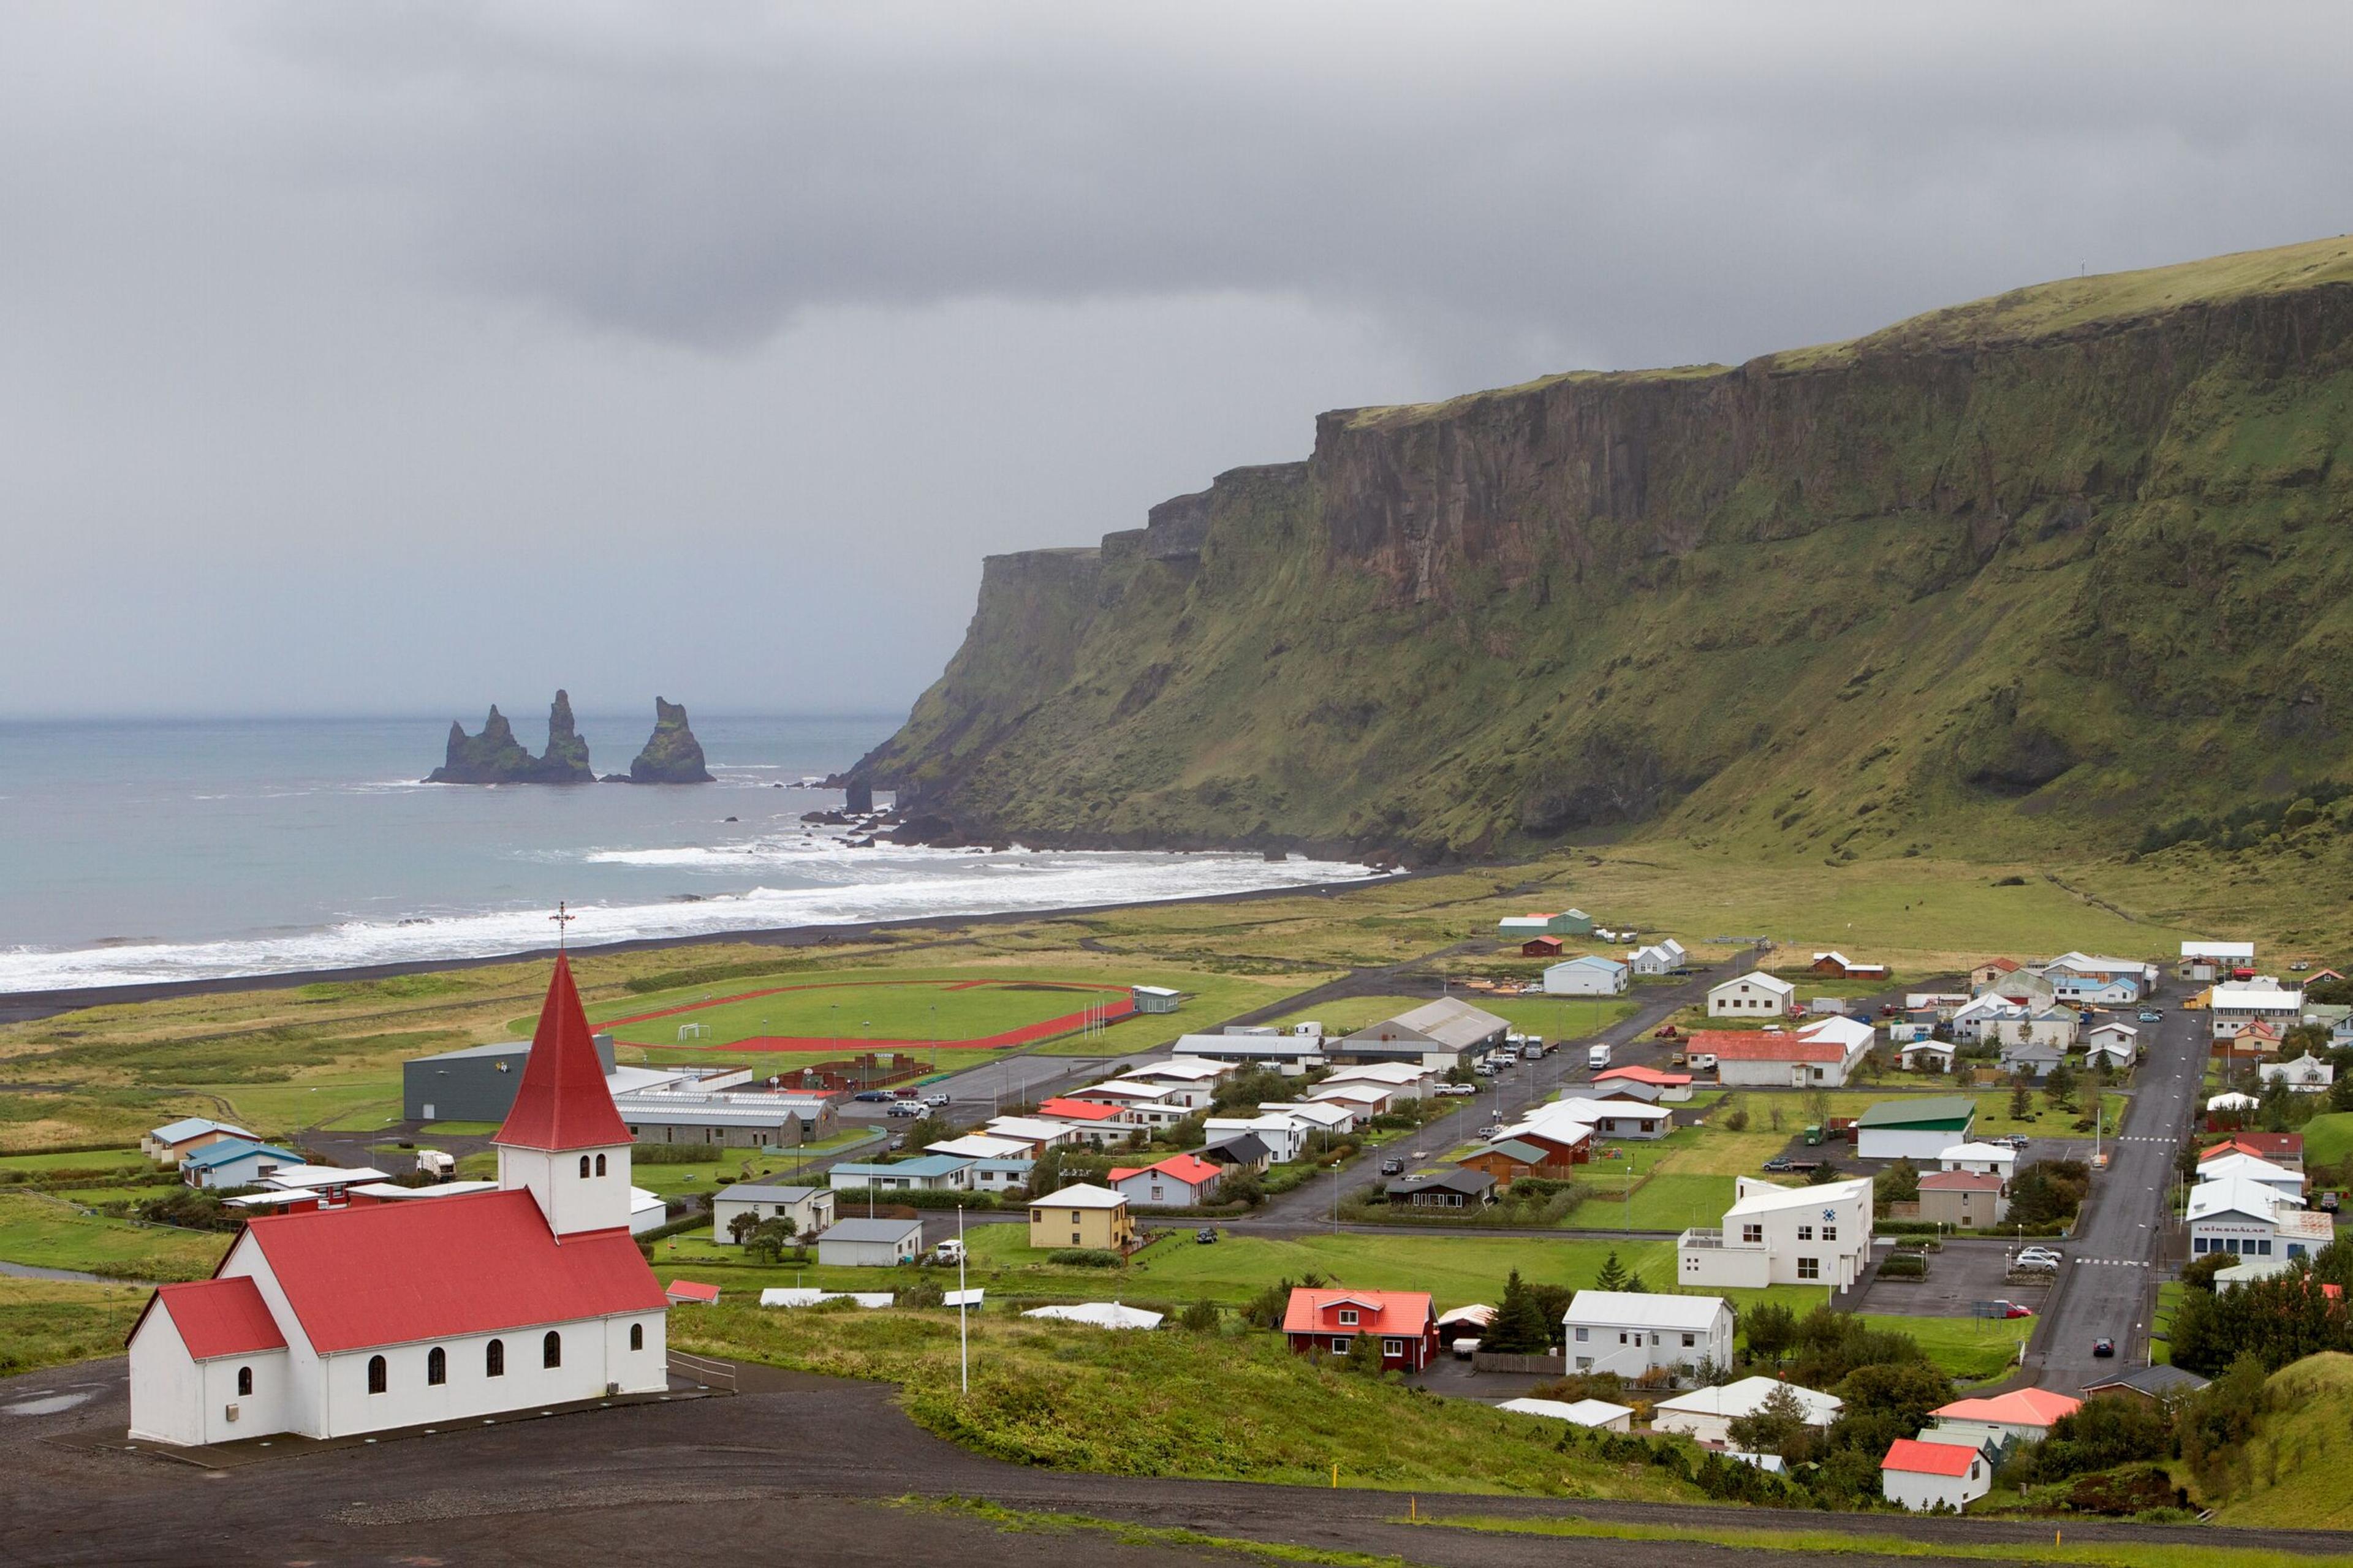 A panomaric view of the town Vík in south Iceland